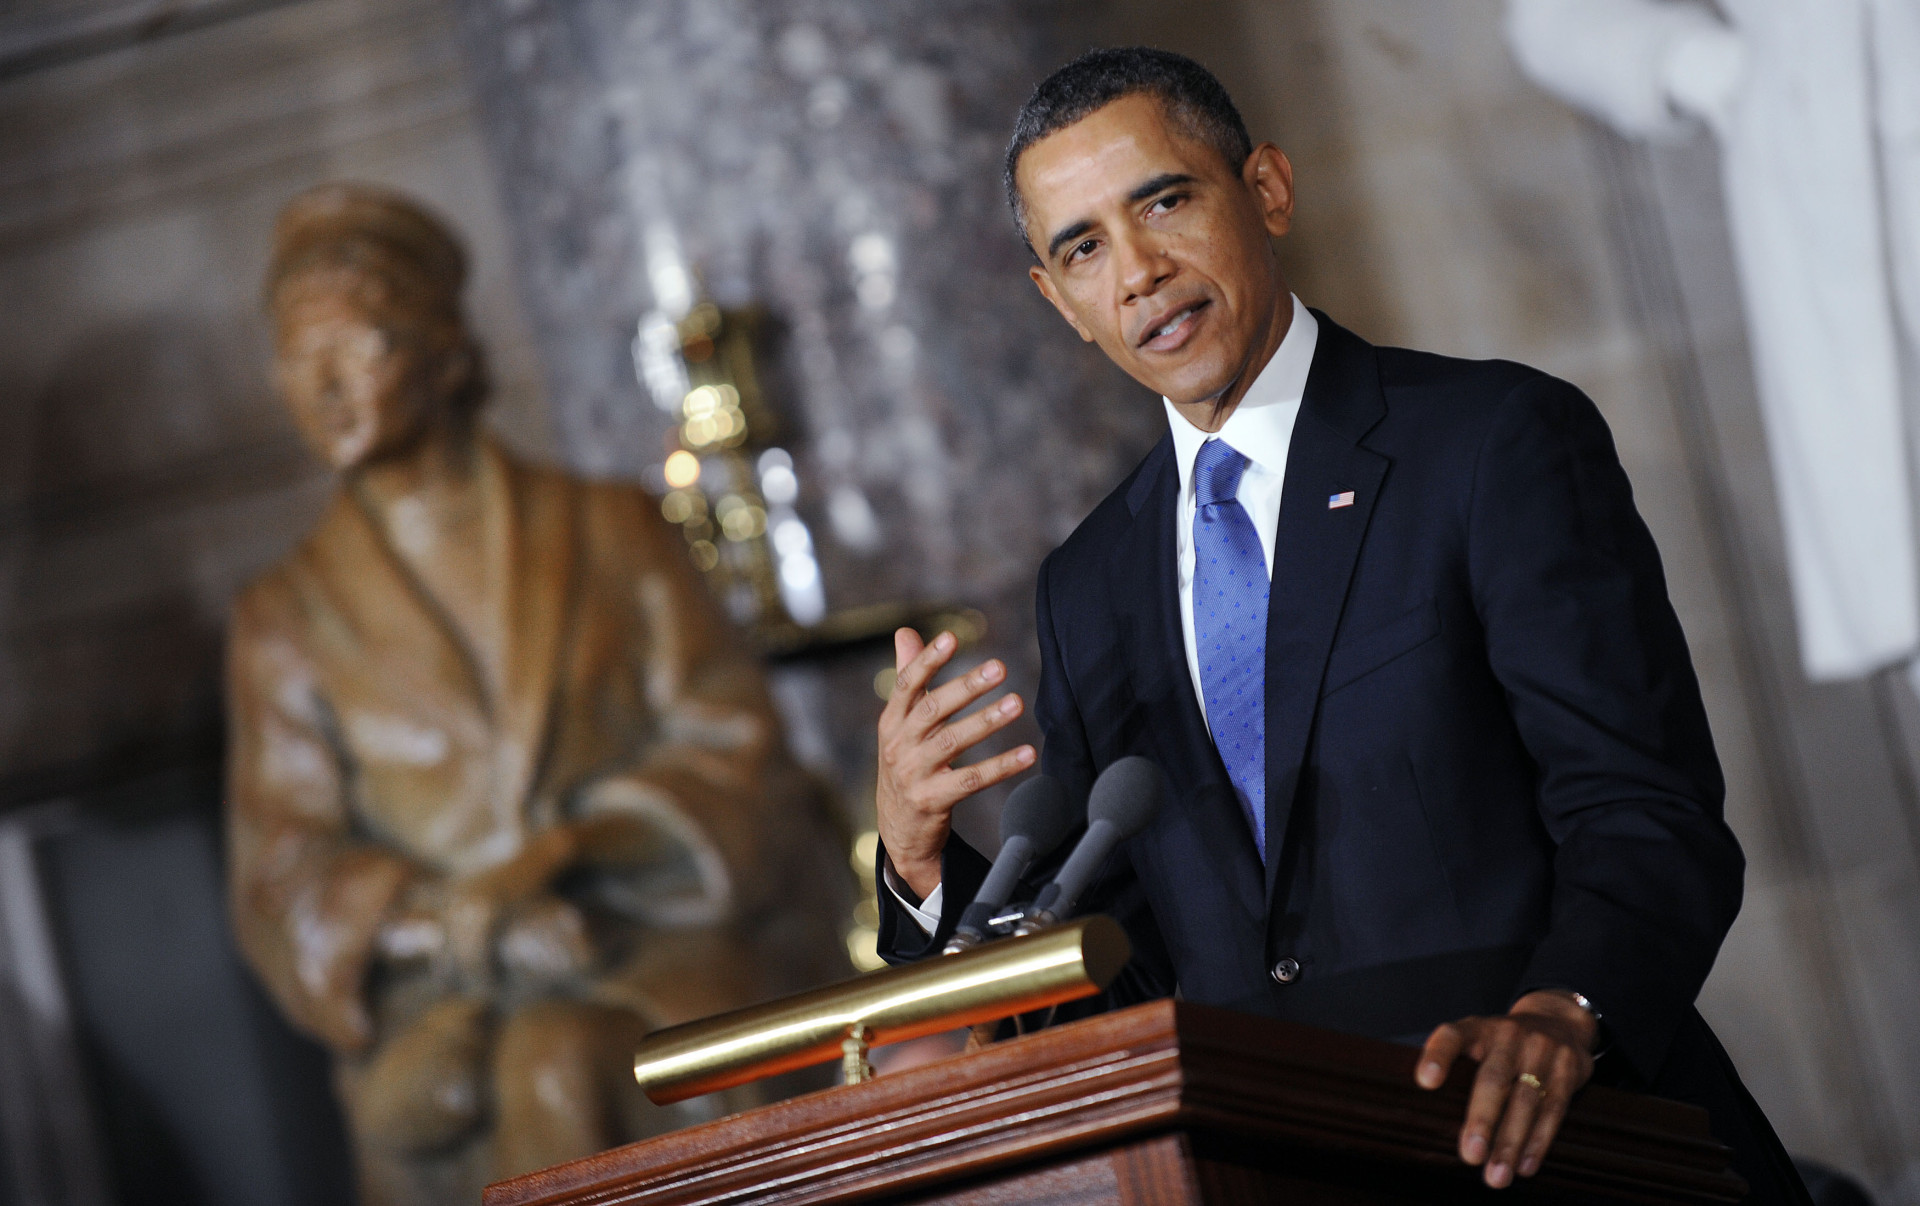 President Barack Obama unveiled the full-length statue in the Capitol's National Statuary Hall.<p><a href="https://www.msn.com/en-us/community/channel/vid-7xx8mnucu55yw63we9va2gwr7uihbxwc68fxqp25x6tg4ftibpra?cvid=94631541bc0f4f89bfd59158d696ad7e">Follow us and access great exclusive content every day</a></p>